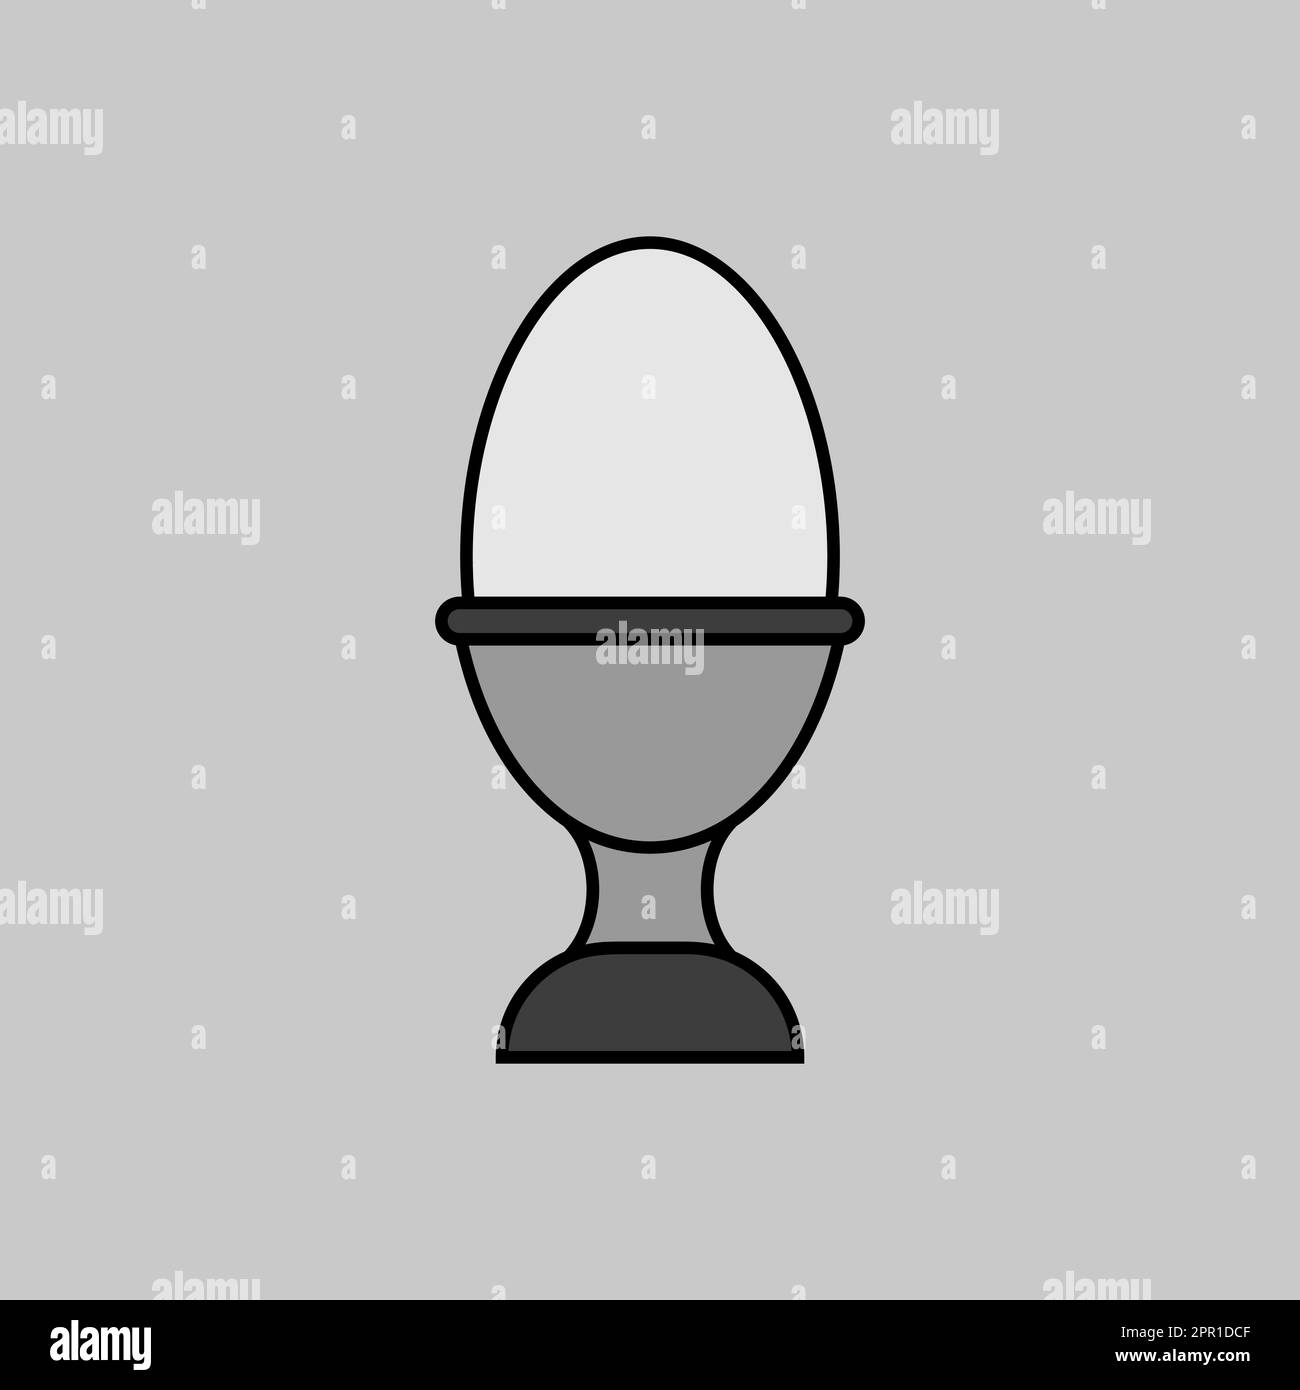 Soft boiled egg in an egg cup vector icon Stock Vector